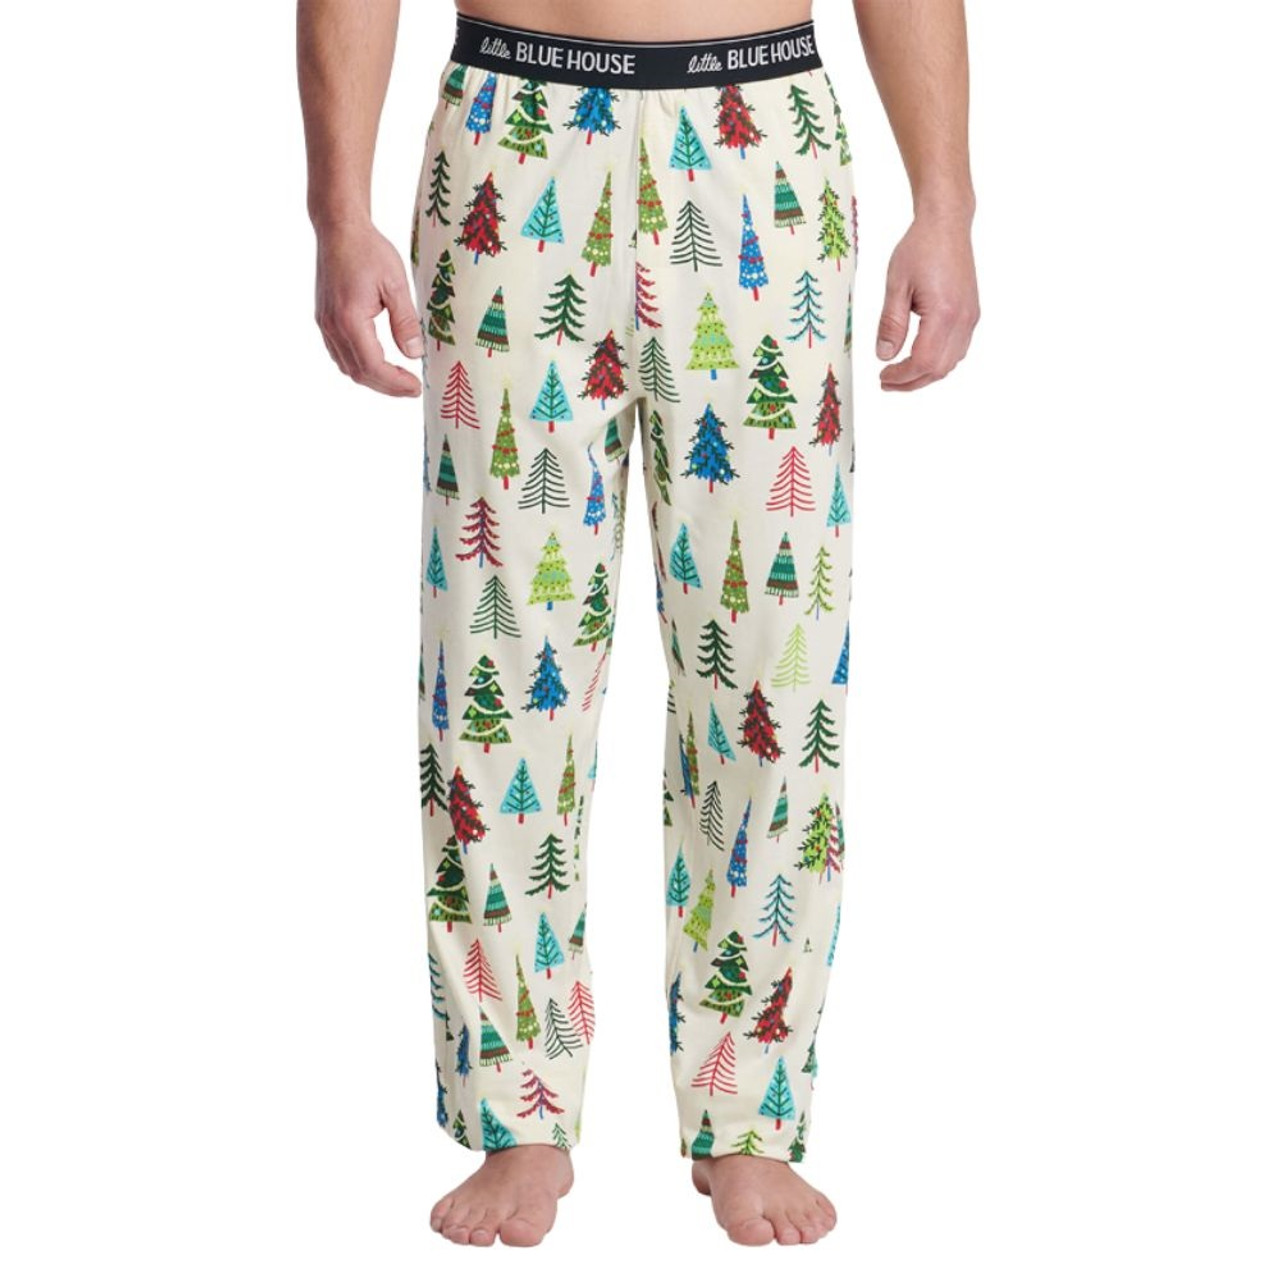 https://cdn11.bigcommerce.com/s-c9a80/images/stencil/1280x1280/products/17907/67433/PA4TREE008_Christmas_Trees_Mens_Pajama_Pants__01599.1699643993.jpg?c=2